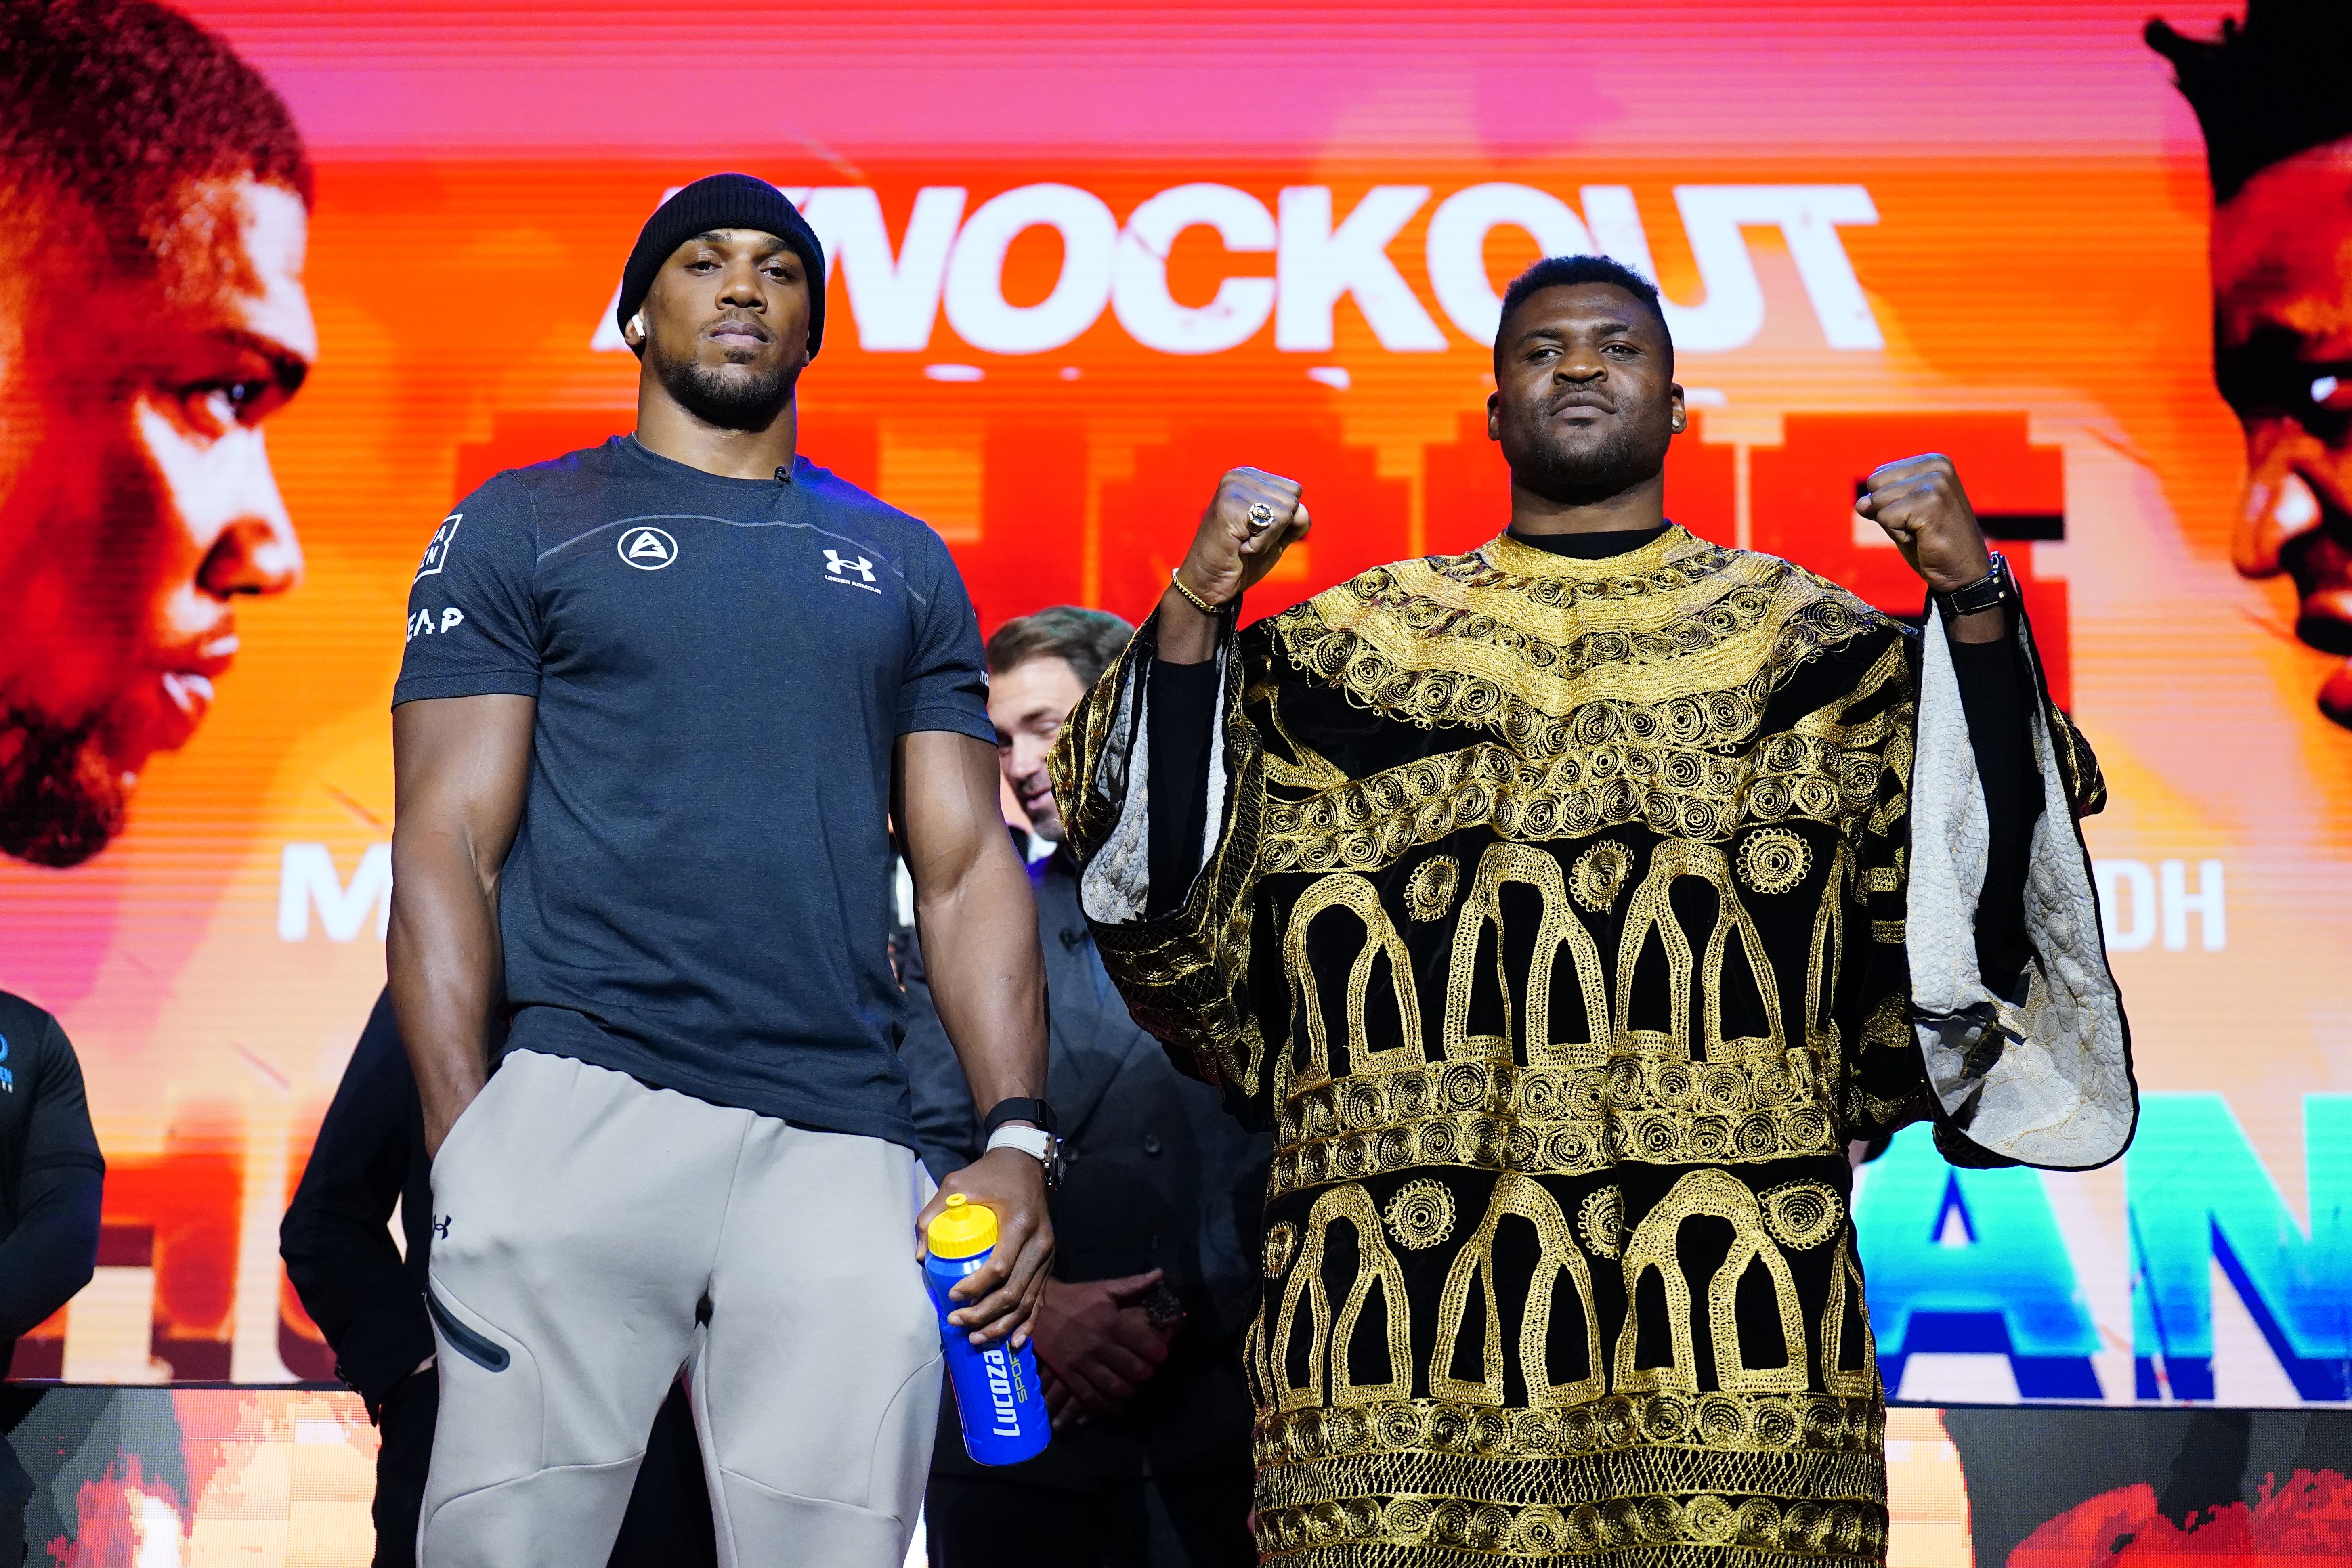 Joshua and Ngannou at the press conference for their upcoming fight